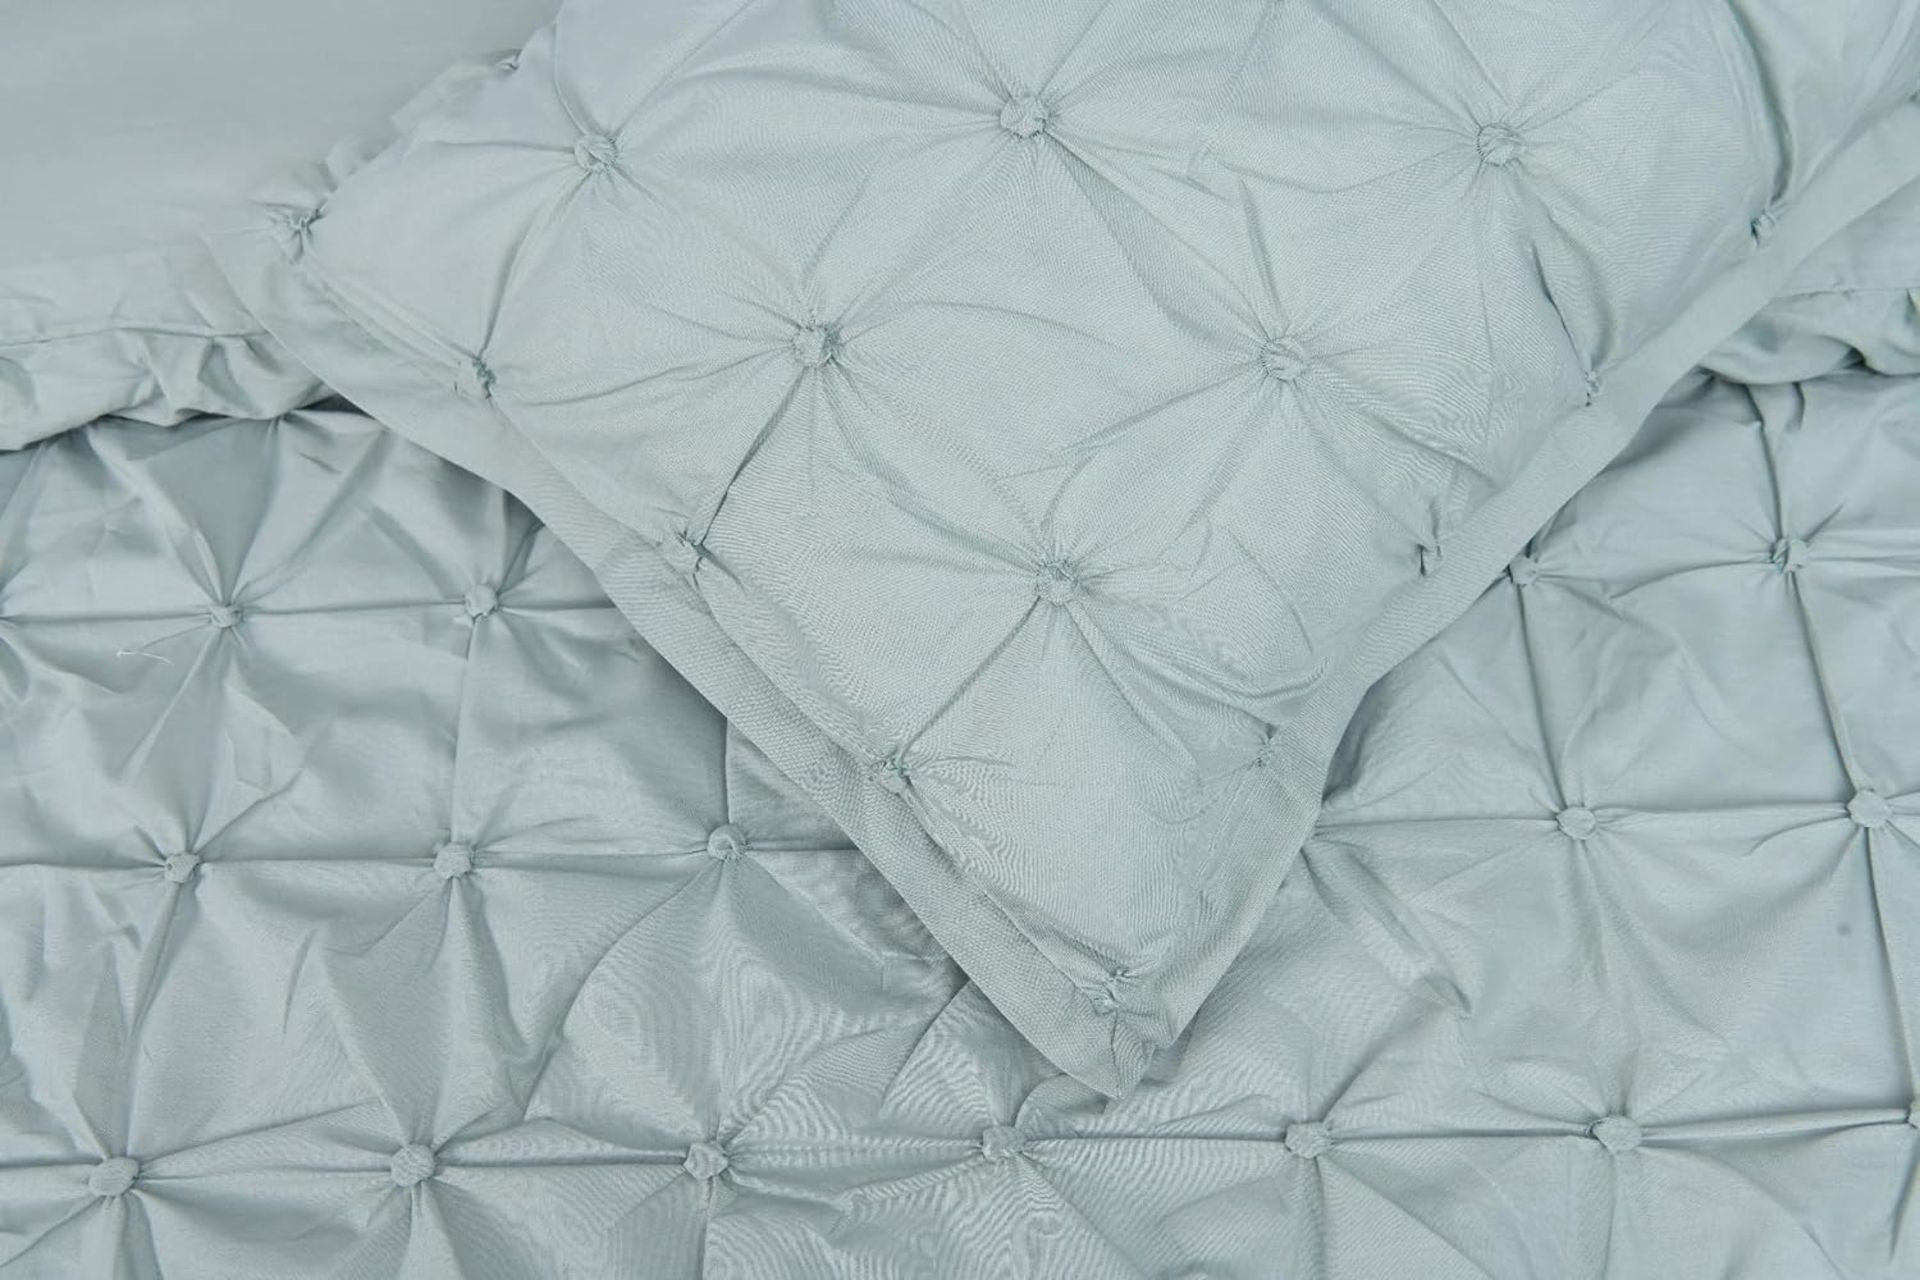 11x NEW & PACKAGED SLEEPDOWN Rouched Easy Care SINGLE Duvet Set - SAGE GREEN. RRP £22.99 EACH. (R7- - Image 7 of 7